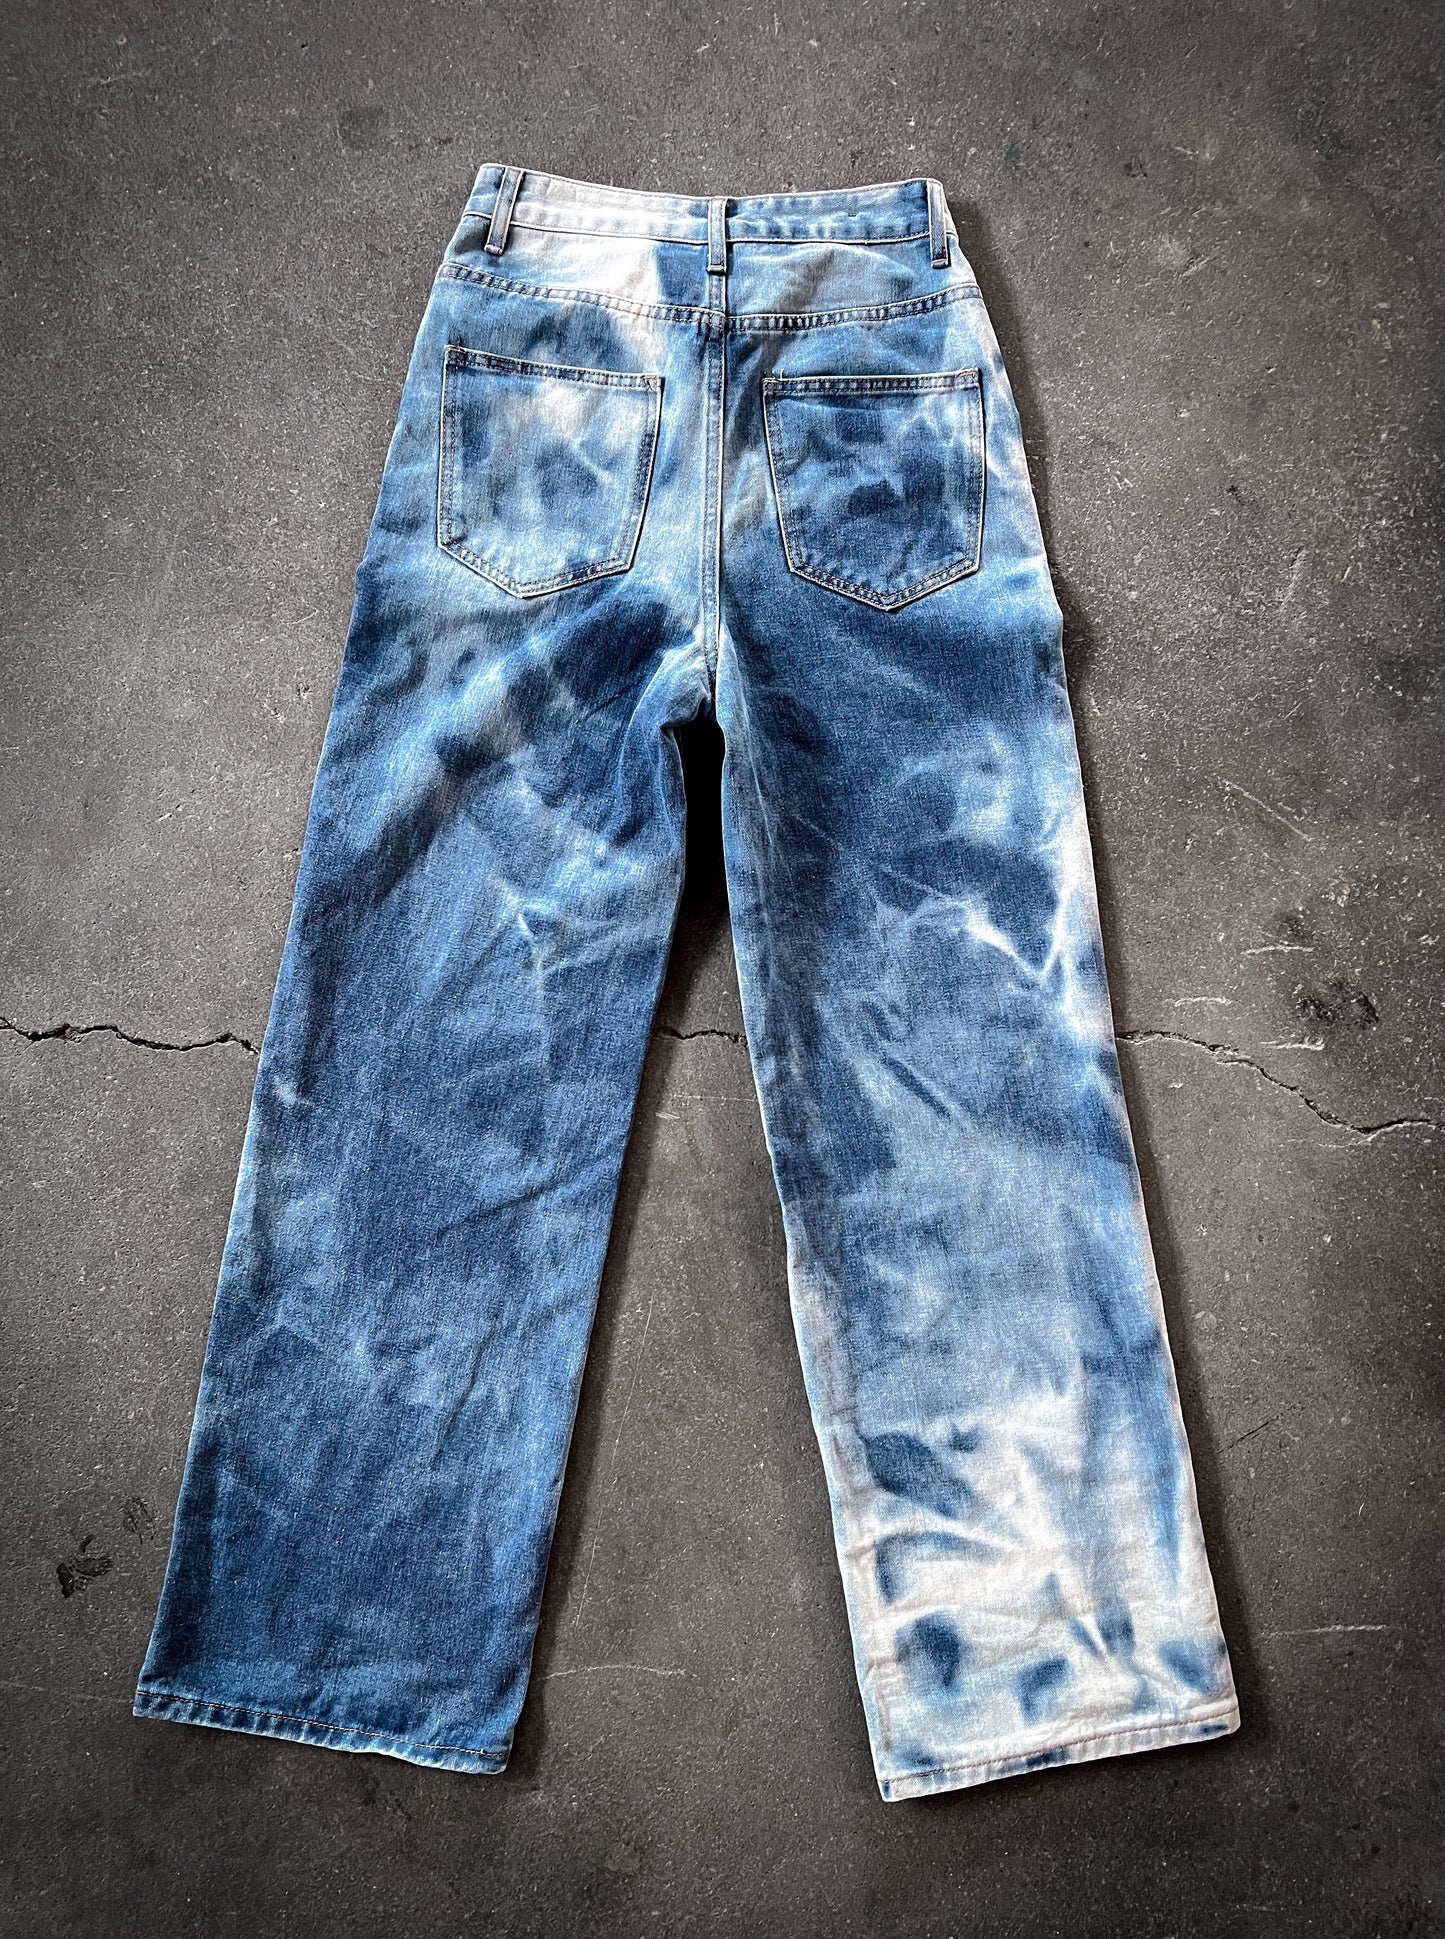 Water Bleached Jeans (#11)